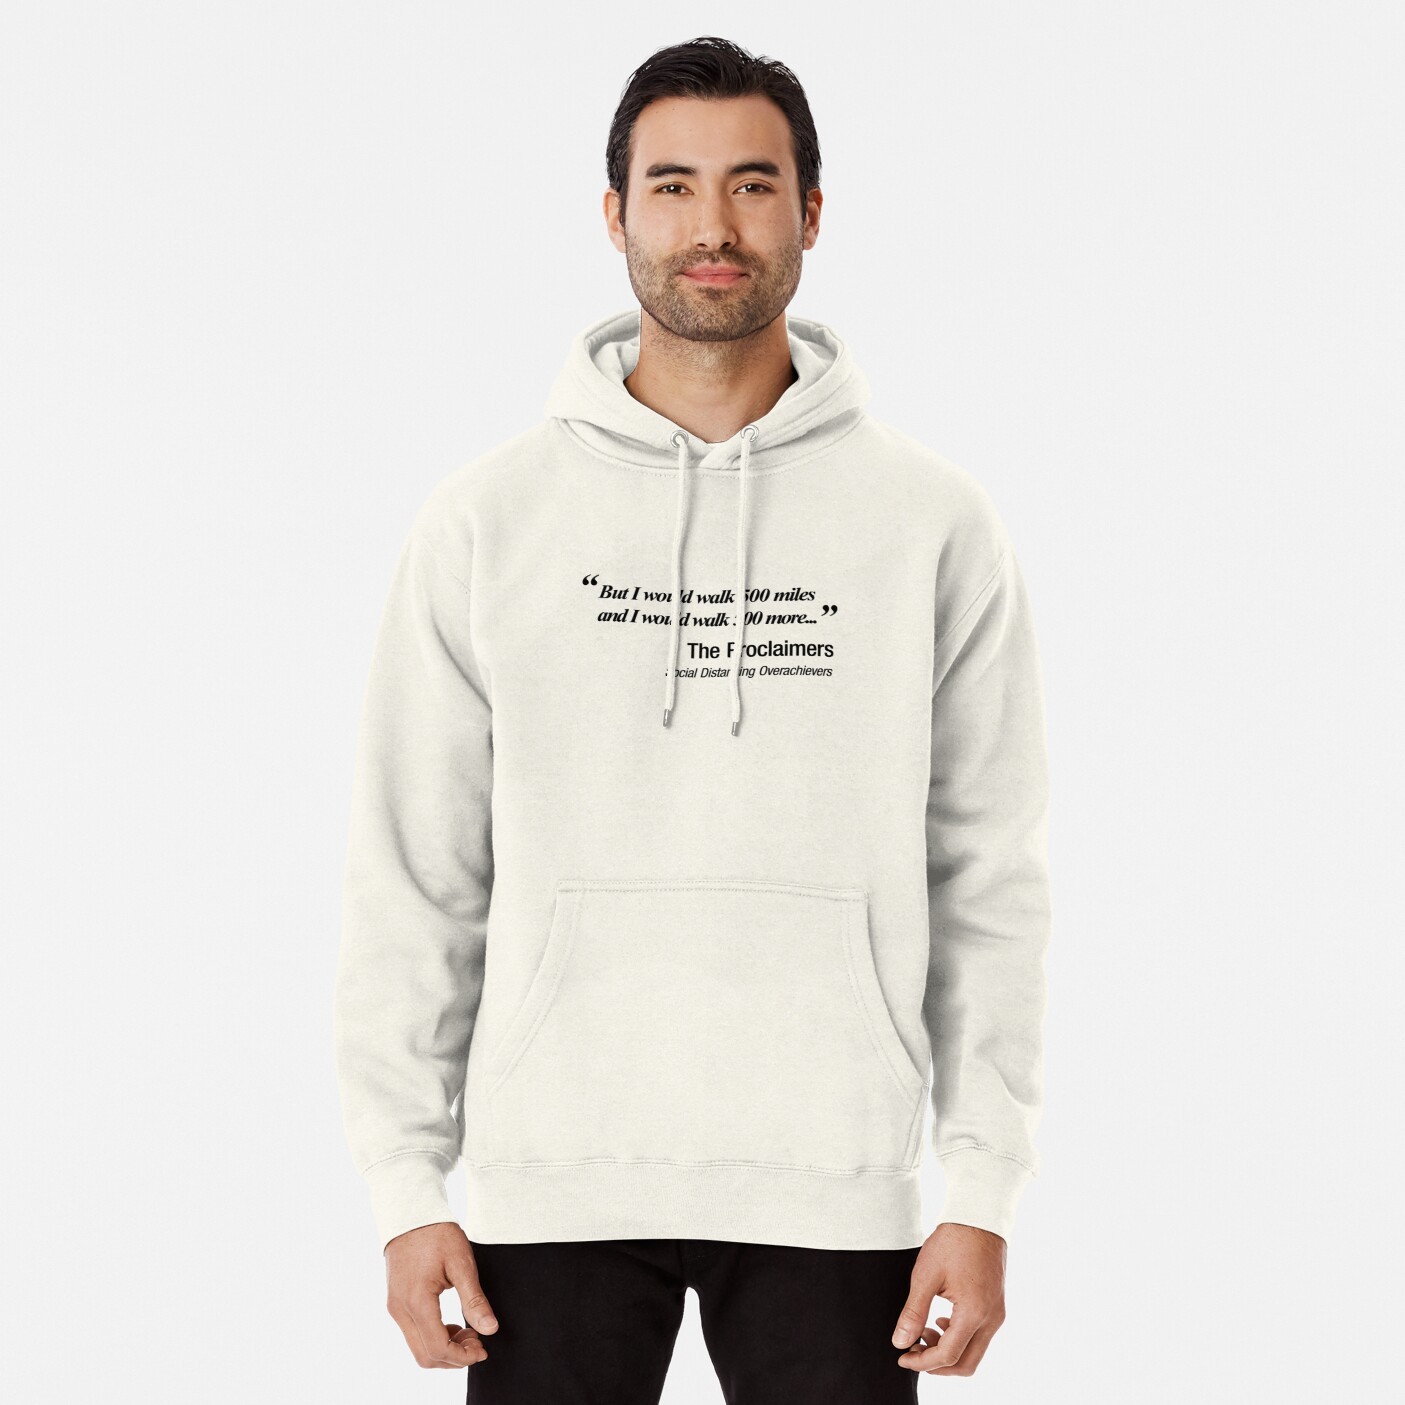 I would walk 500 miles.  Proclaimers Social Distancing Parody hoodie - 